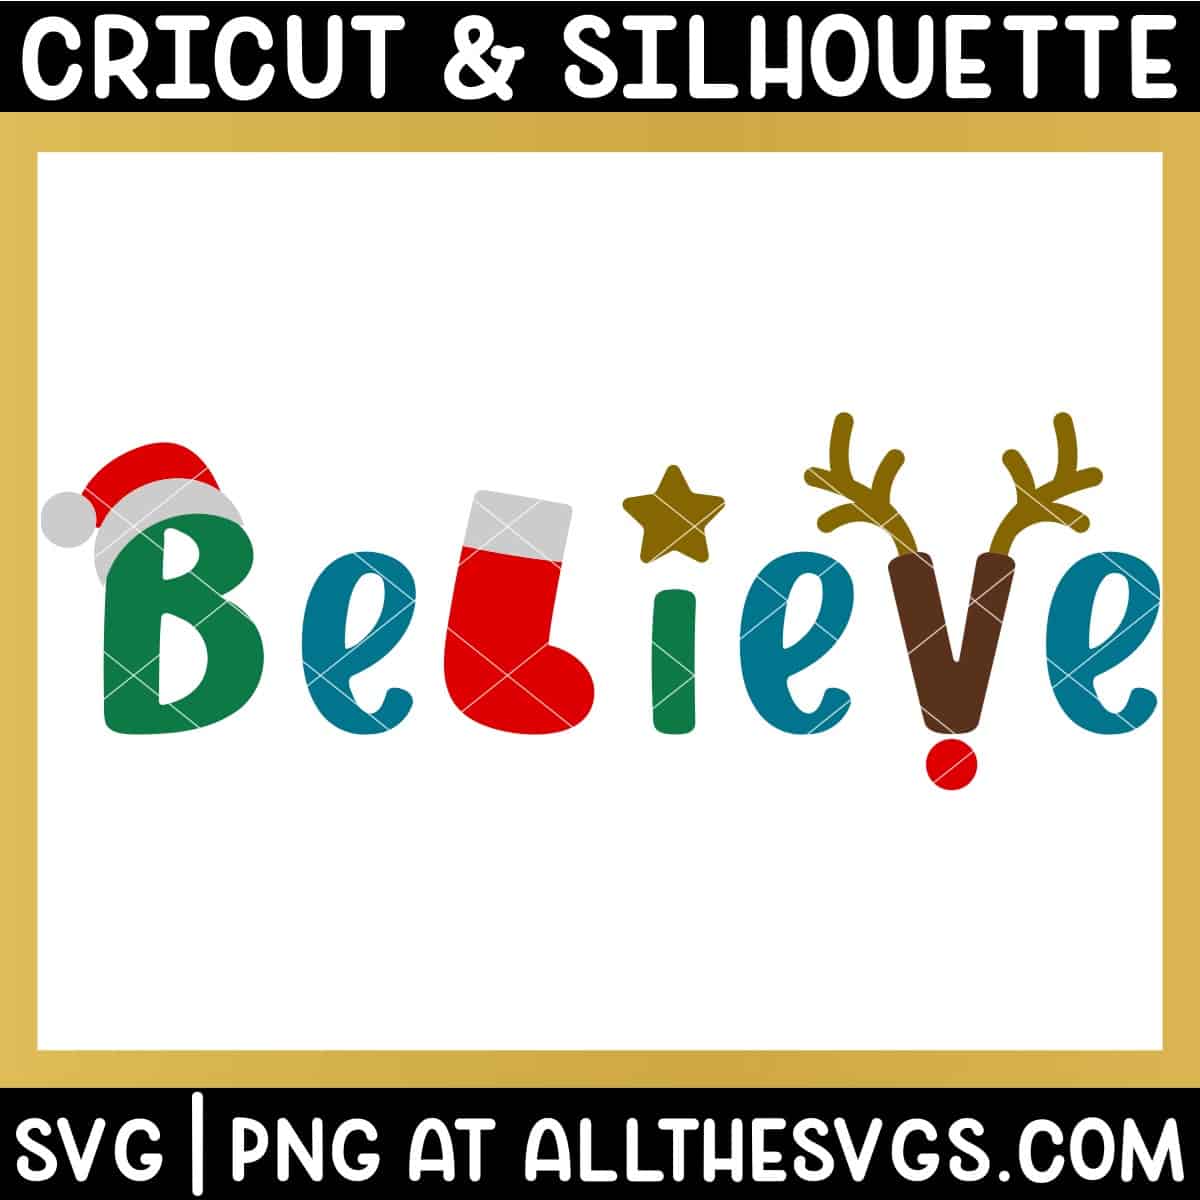 believe svg file with santa hat, stocking, christmas tree star topper, reindeer antlers, rudolph nose.